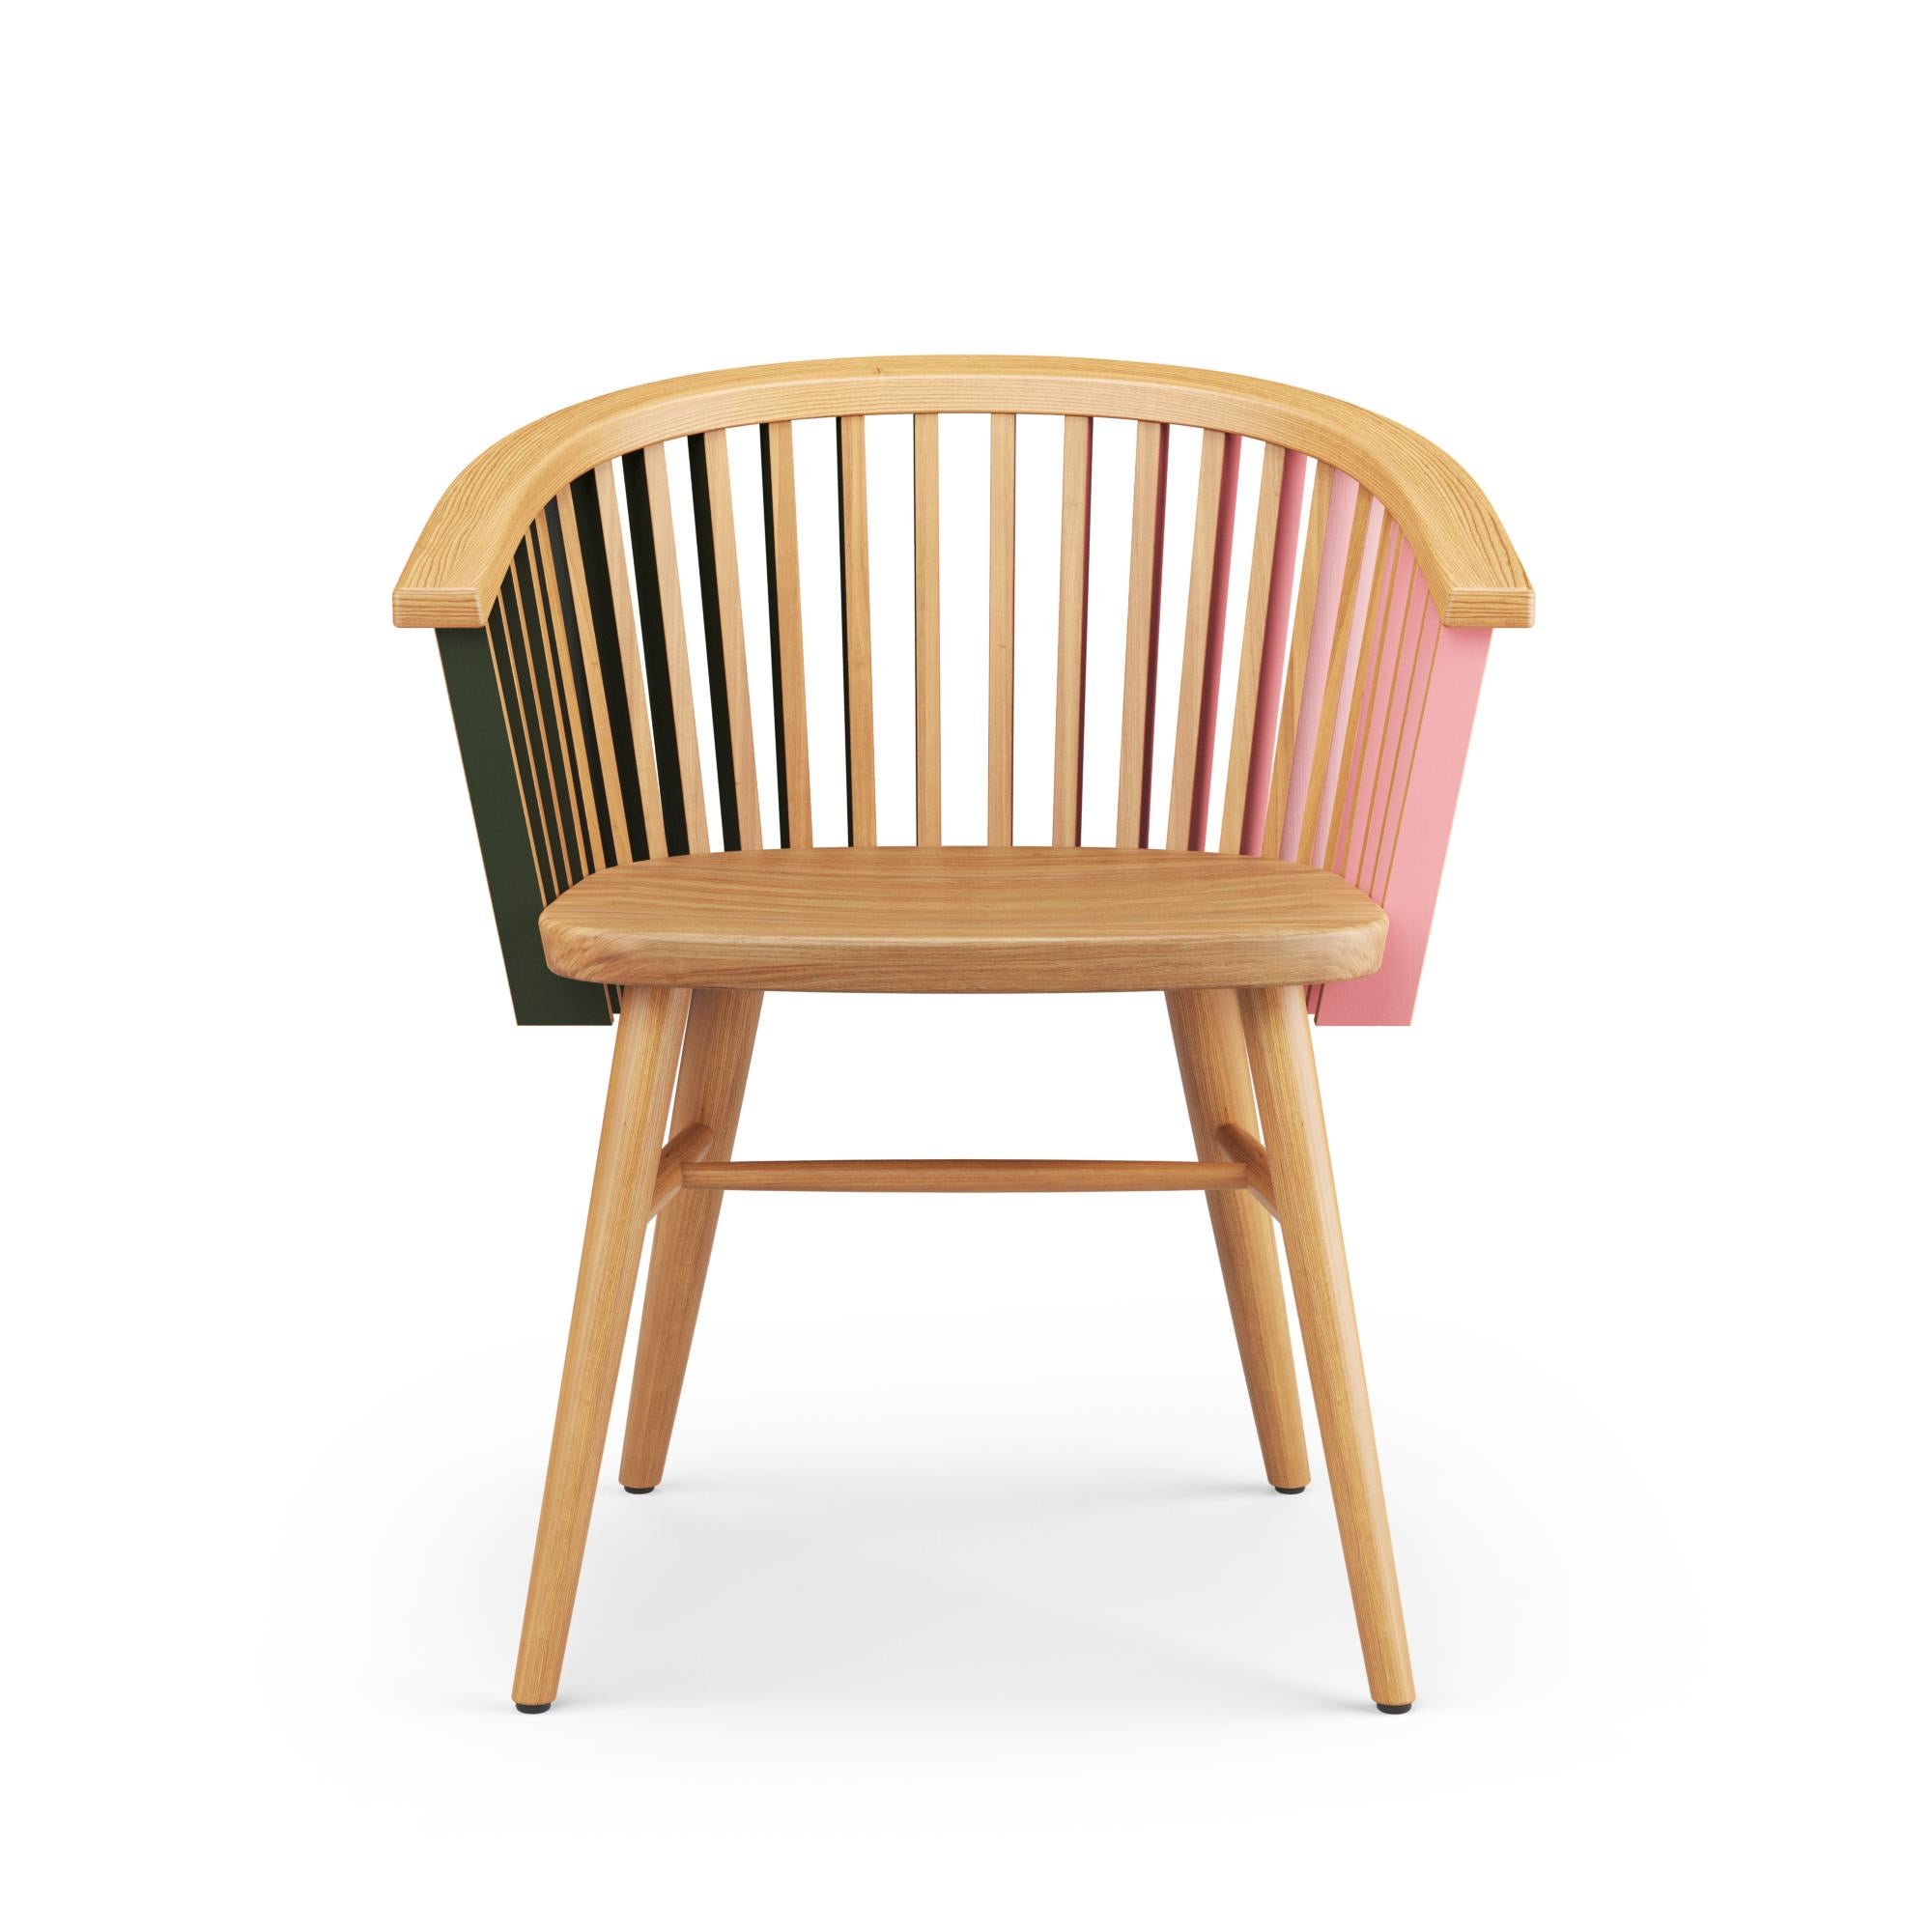 Mexican Hayche, Tornasol Rounded chair, Oak, Green & Pink, Solid Wood, UK, Made To Order For Sale